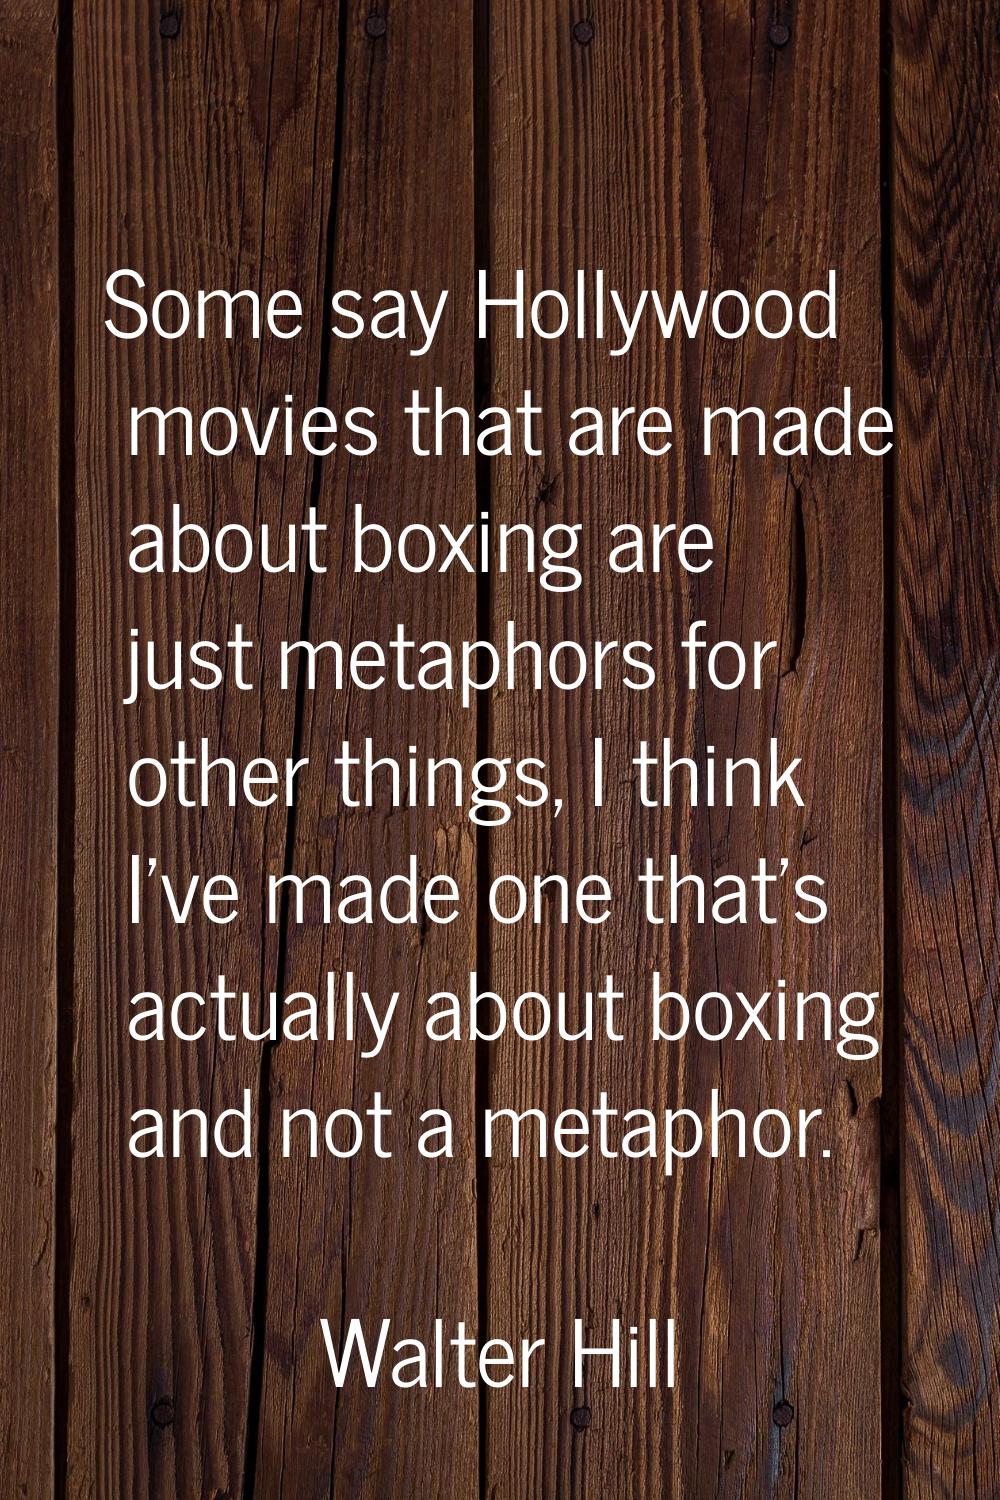 Some say Hollywood movies that are made about boxing are just metaphors for other things, I think I